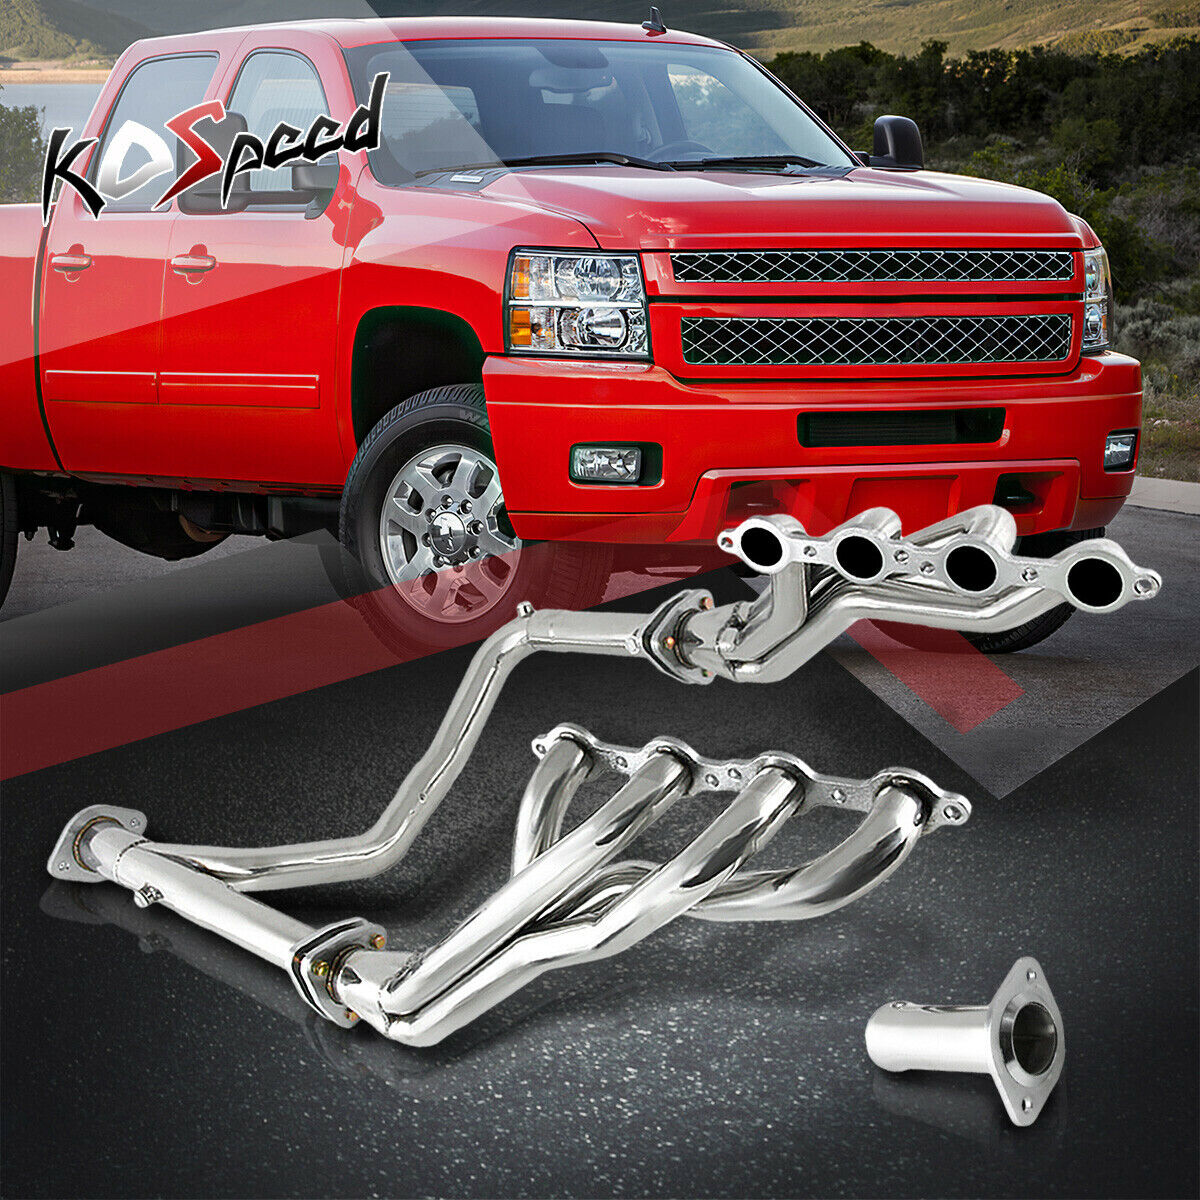 Stainless Steel Exhaust Header Manifold for 06-13 Chevy/GMC GMT900 4.8/5.3/6.0L